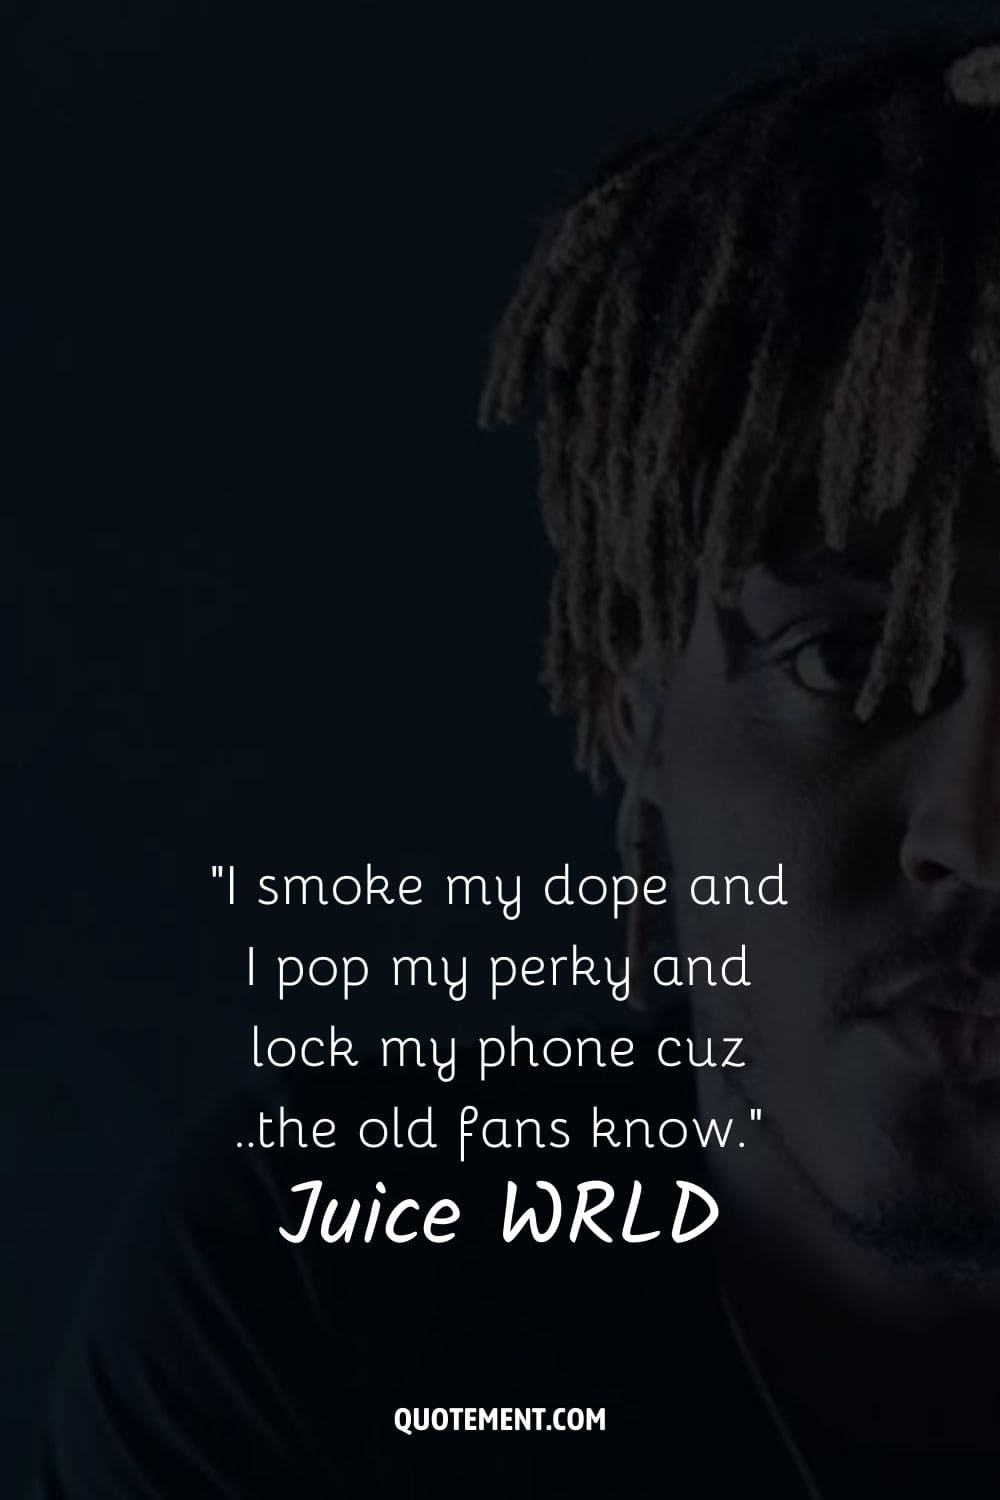 I smoke my dope and I pop my perky and lock my phone cuz ..the old fans know.